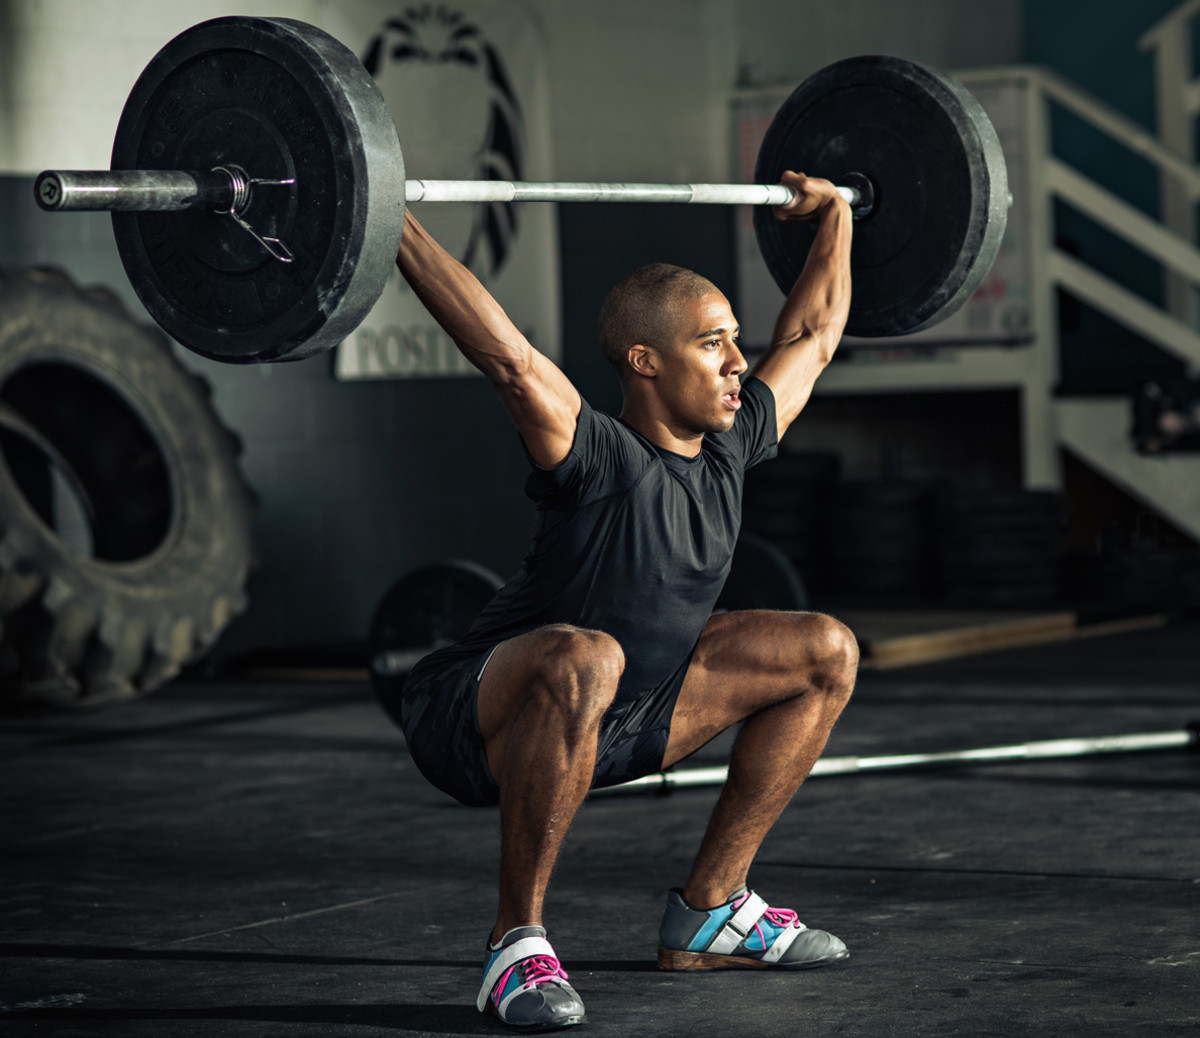 20 Things You Didn't Know About Weightlifting - Men's Journal